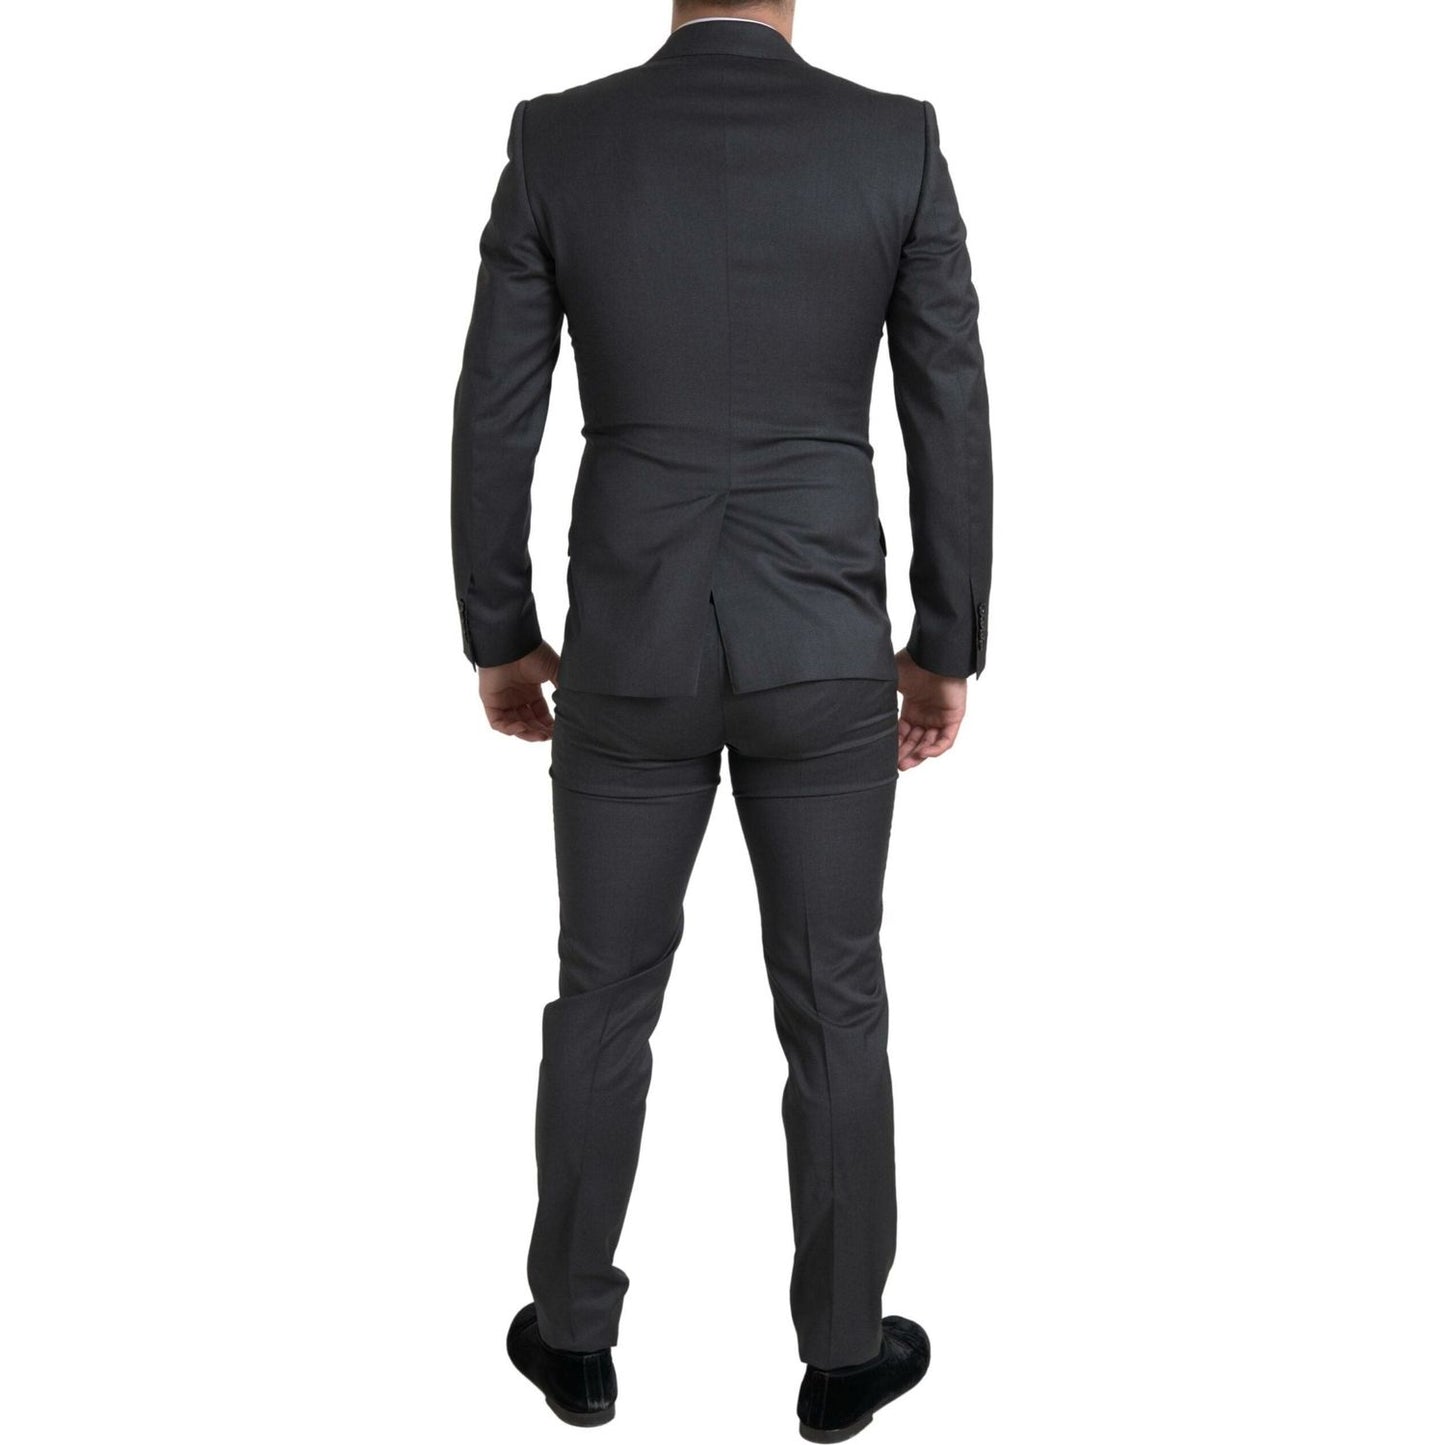 Dolce & Gabbana Sleek Grey Slim Fit Double Breasted Suit gray-2-piece-double-breasted-sicilia-suit